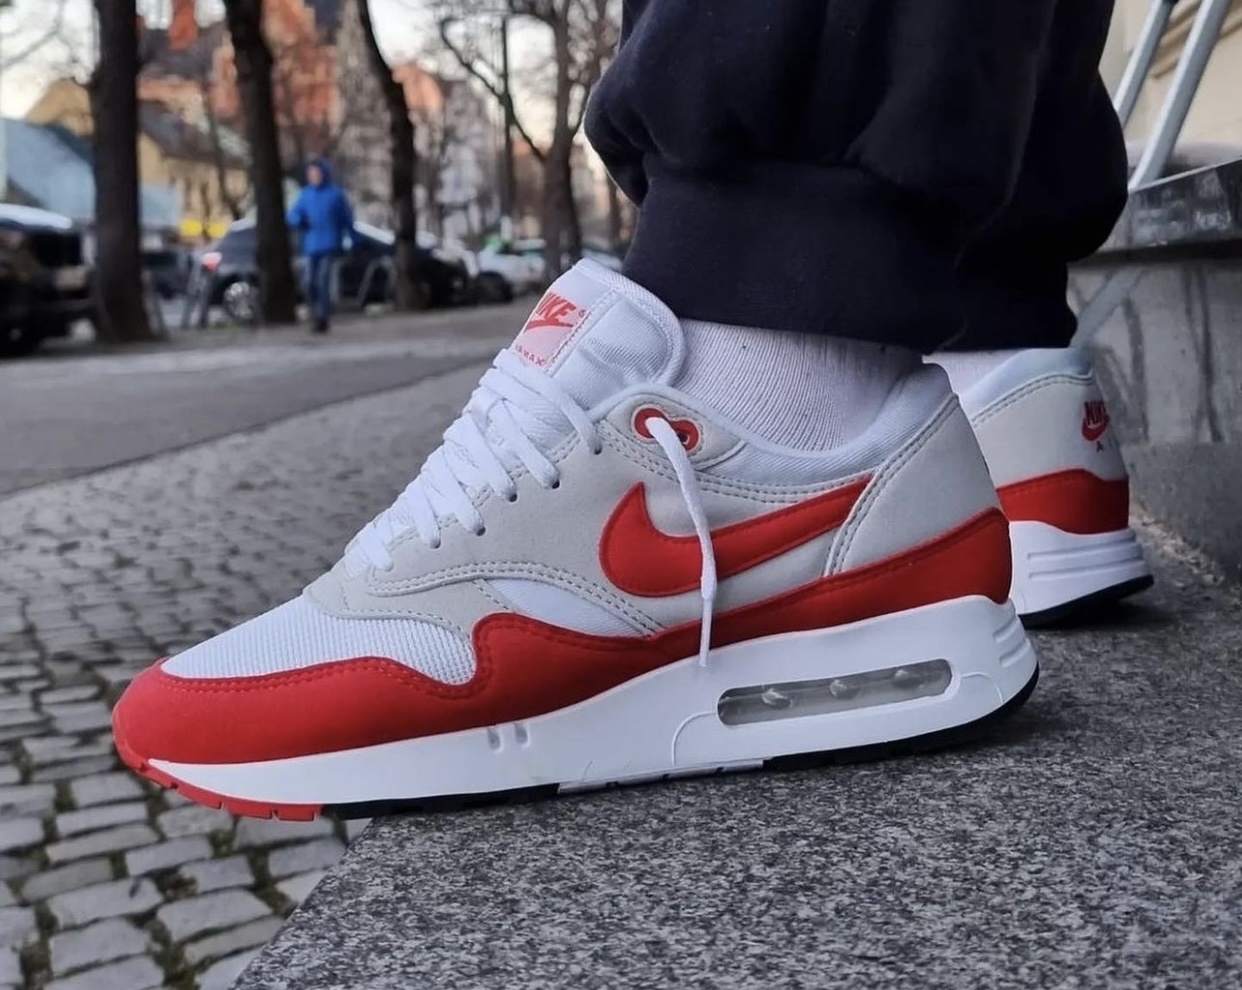 Nike Air Max 1 '86 OG 'University Red' WMNS / Big Bubble - DO9844